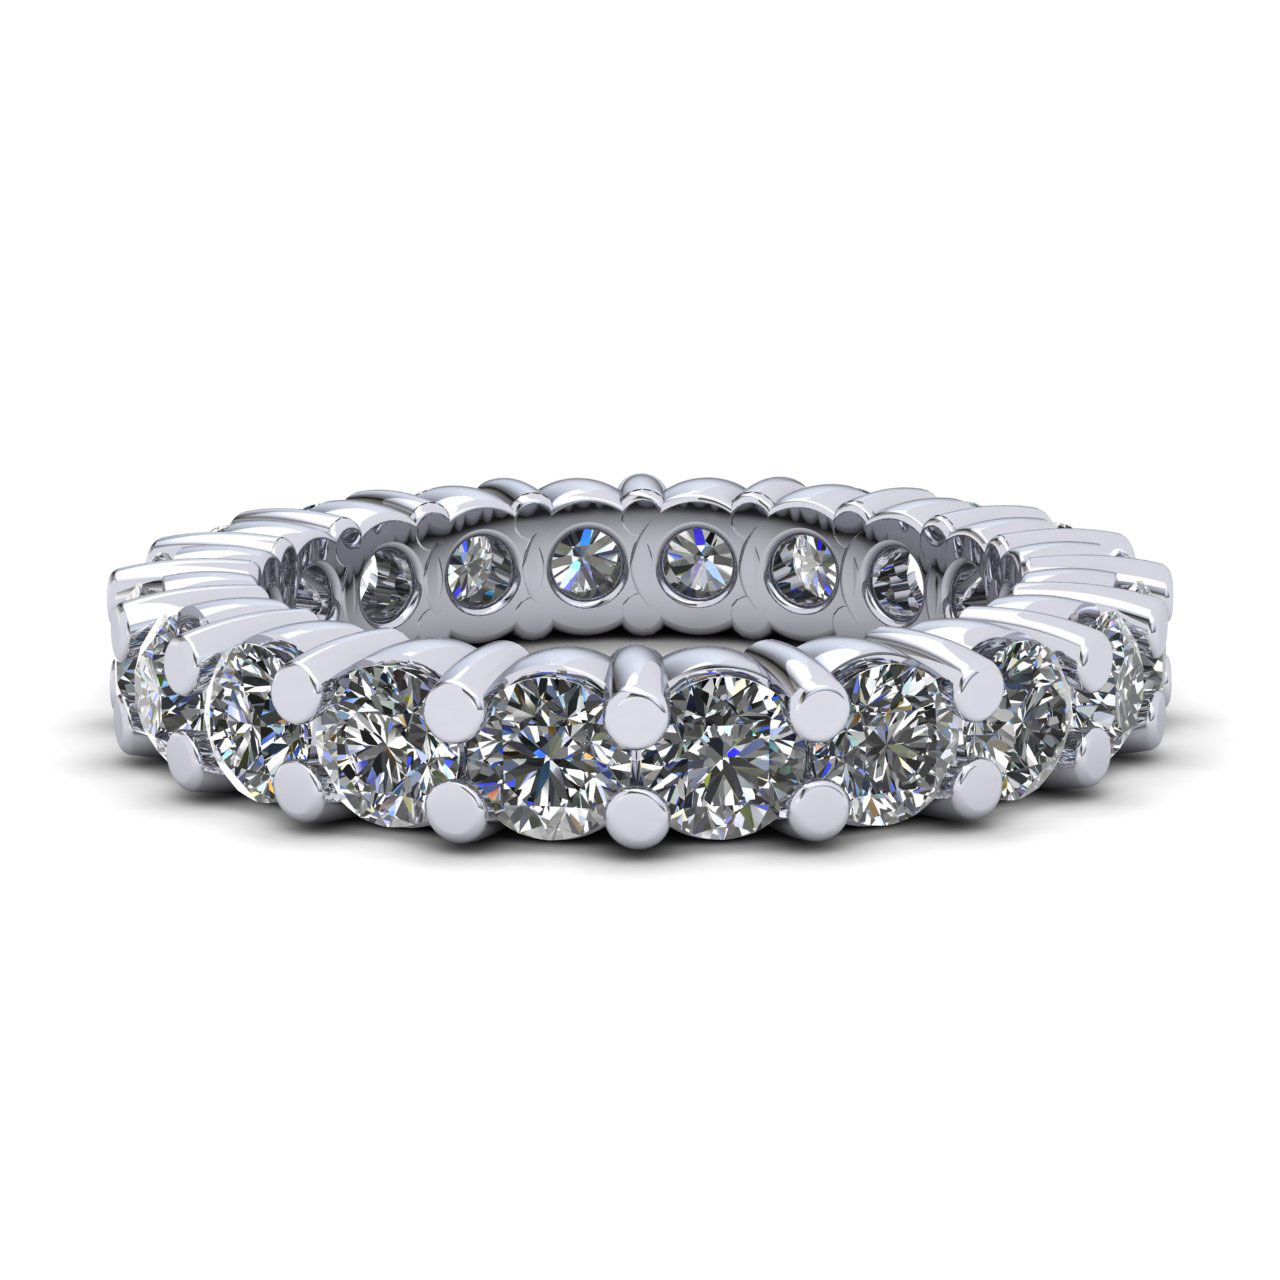 Jewel We Sell Natural 3.00Ct Round Diamond Classic Shared Prong Ladies Anniversary Wedding Eternity Band Ring Solid 18k White Gold F VS2